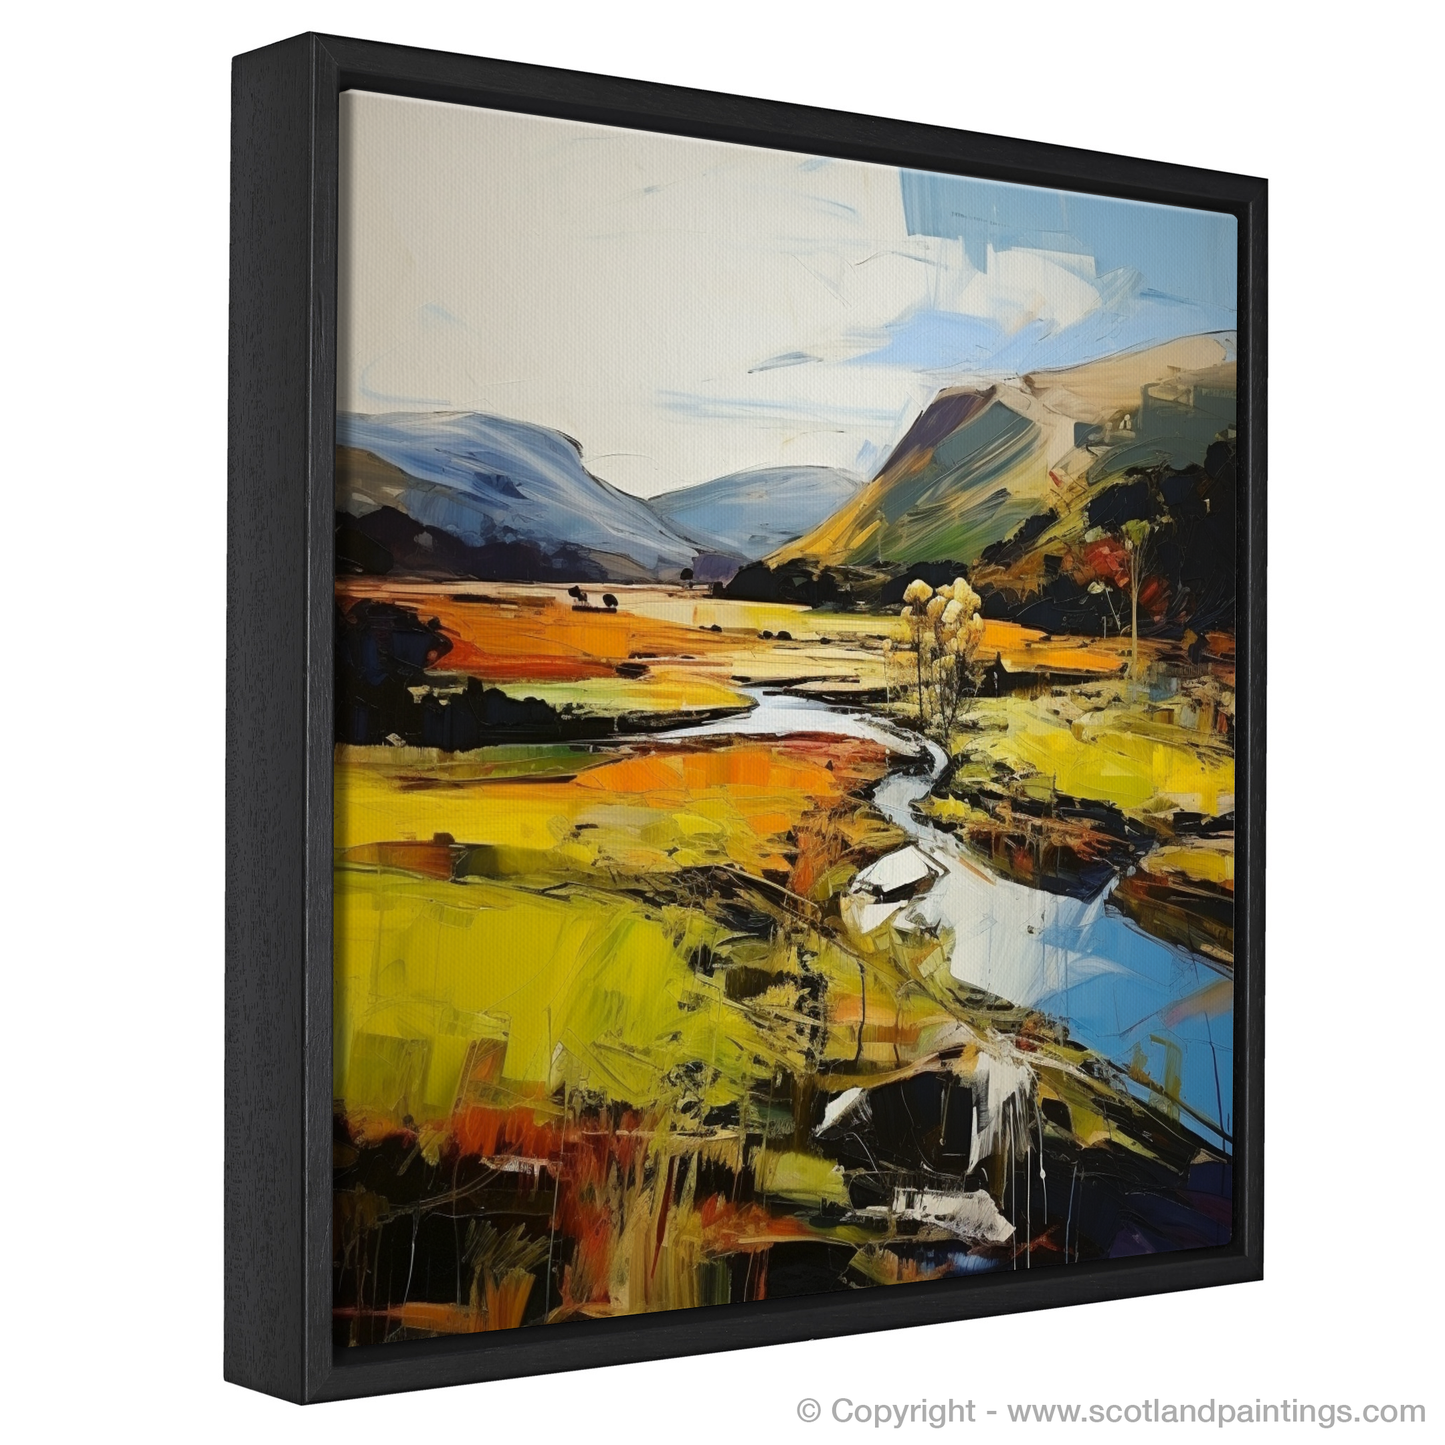 Painting and Art Print of Glen Esk, Angus entitled "Expressionist Rhapsody of Glen Esk".